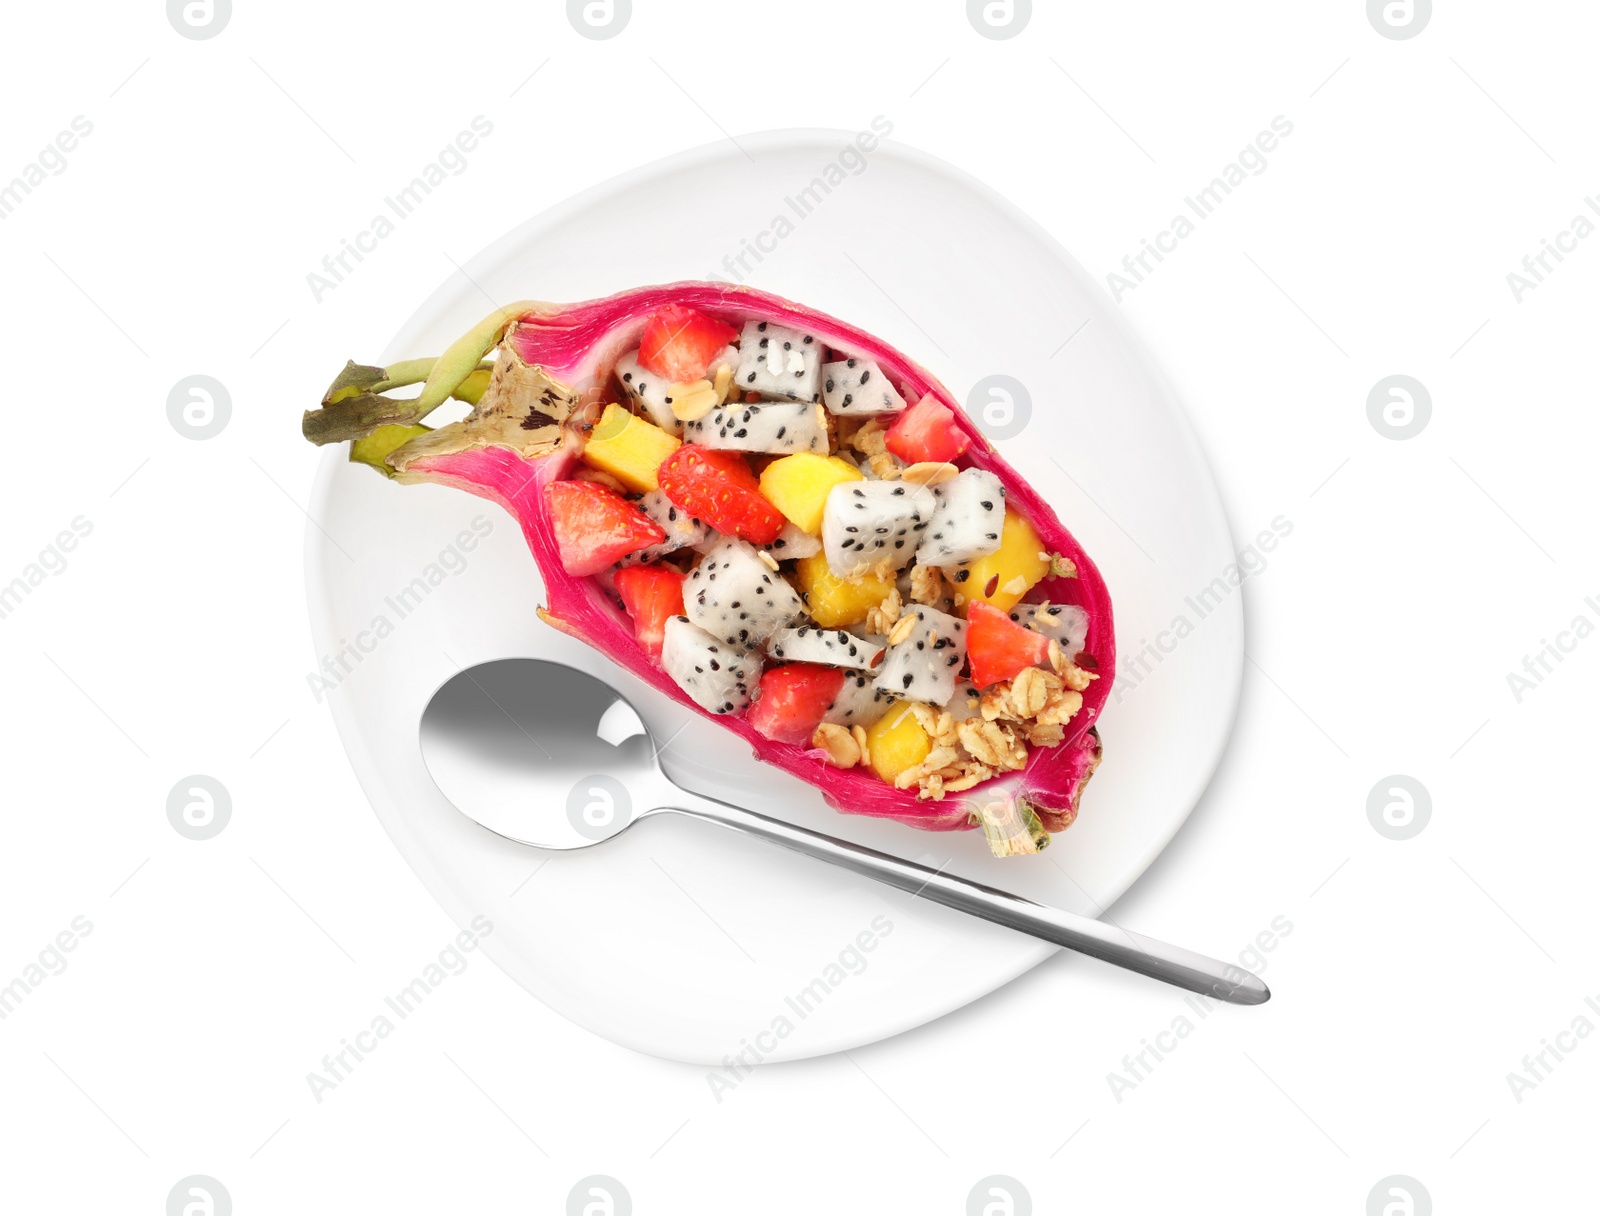 Photo of Yummy pitahaya boat with mango, granola and strawberry near spoon on white background, top view